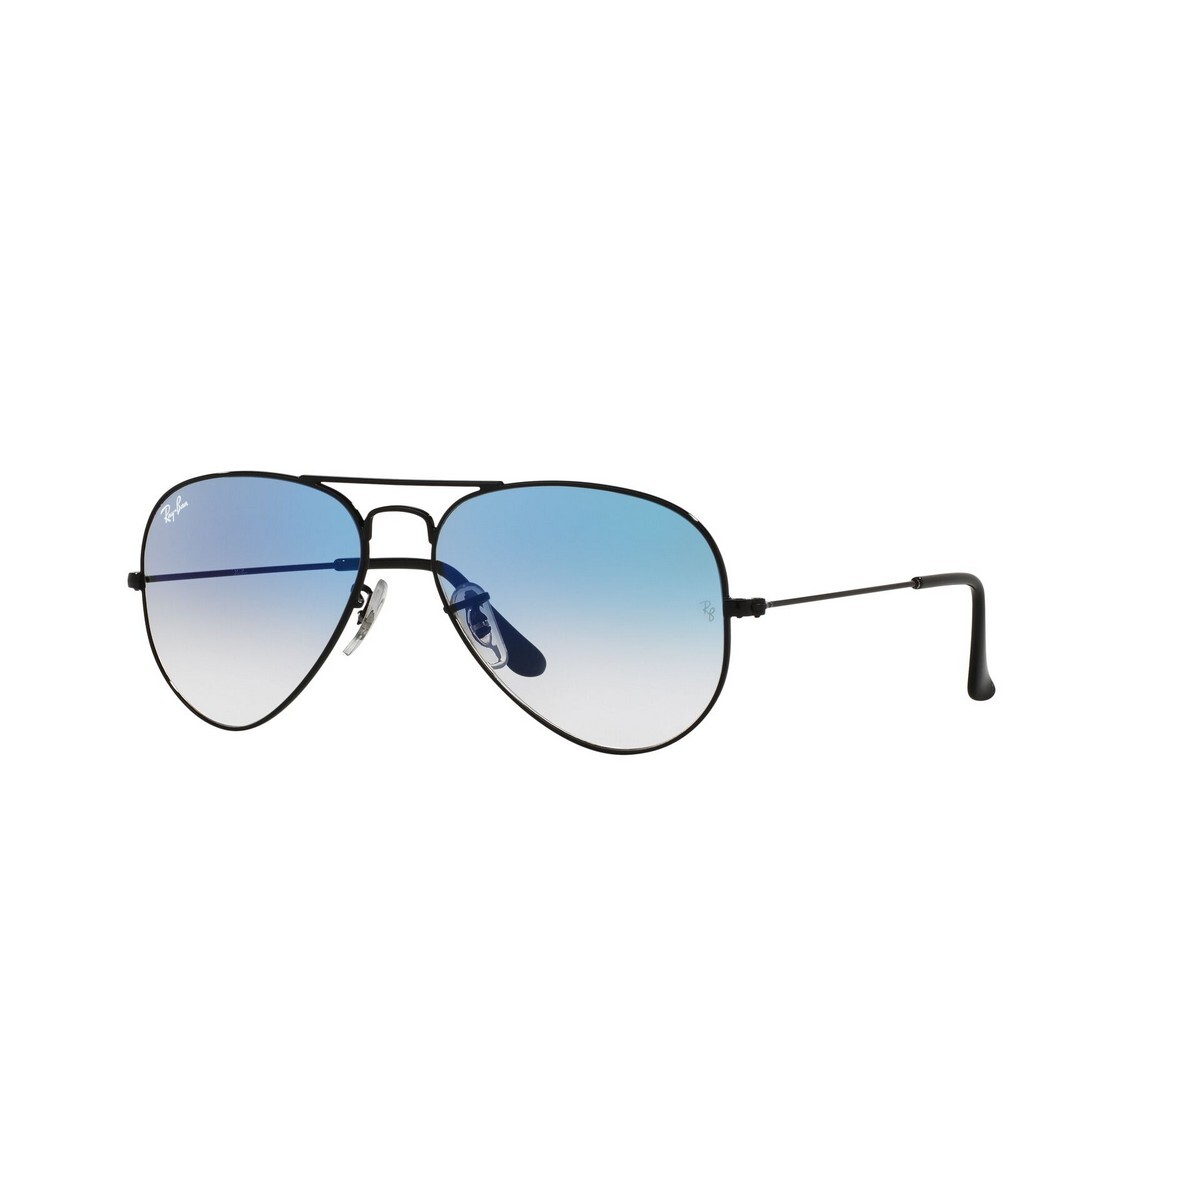 Rayban Unisex Black Frame With Clear Gradient Blue Lens Sunglass